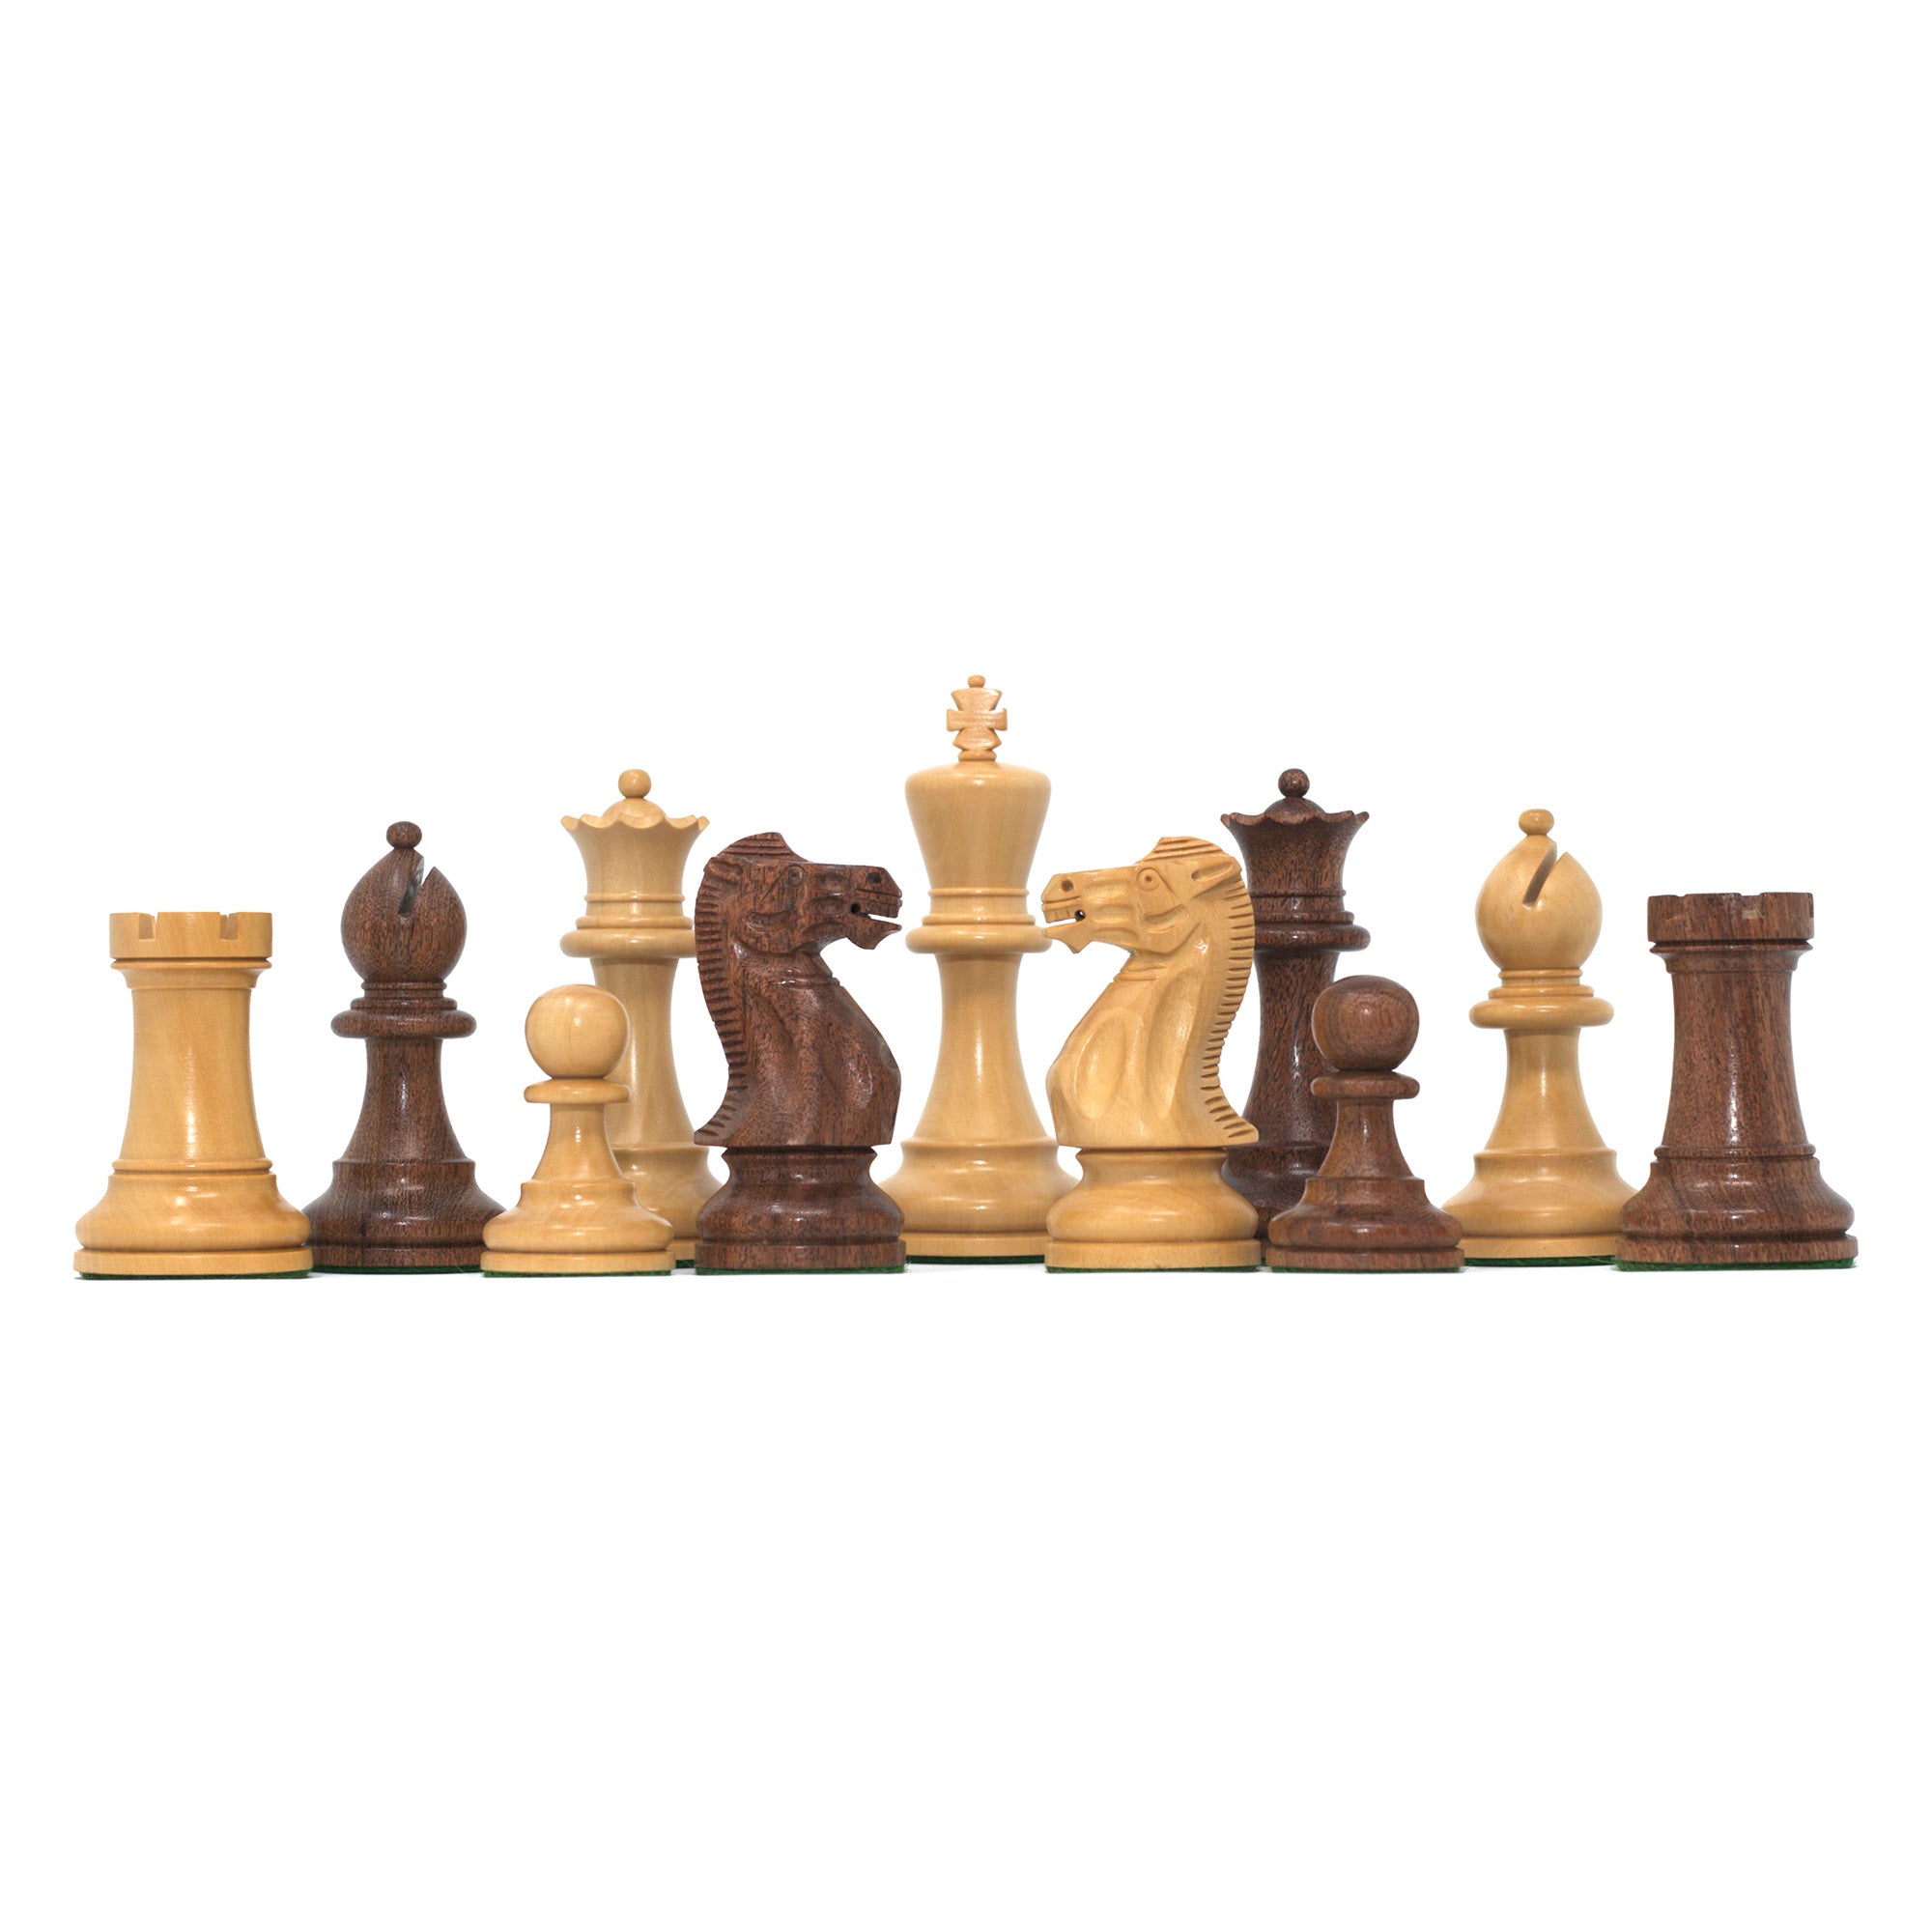 The Golden Collector Series Luxury Chess Pieces - 4.4 King